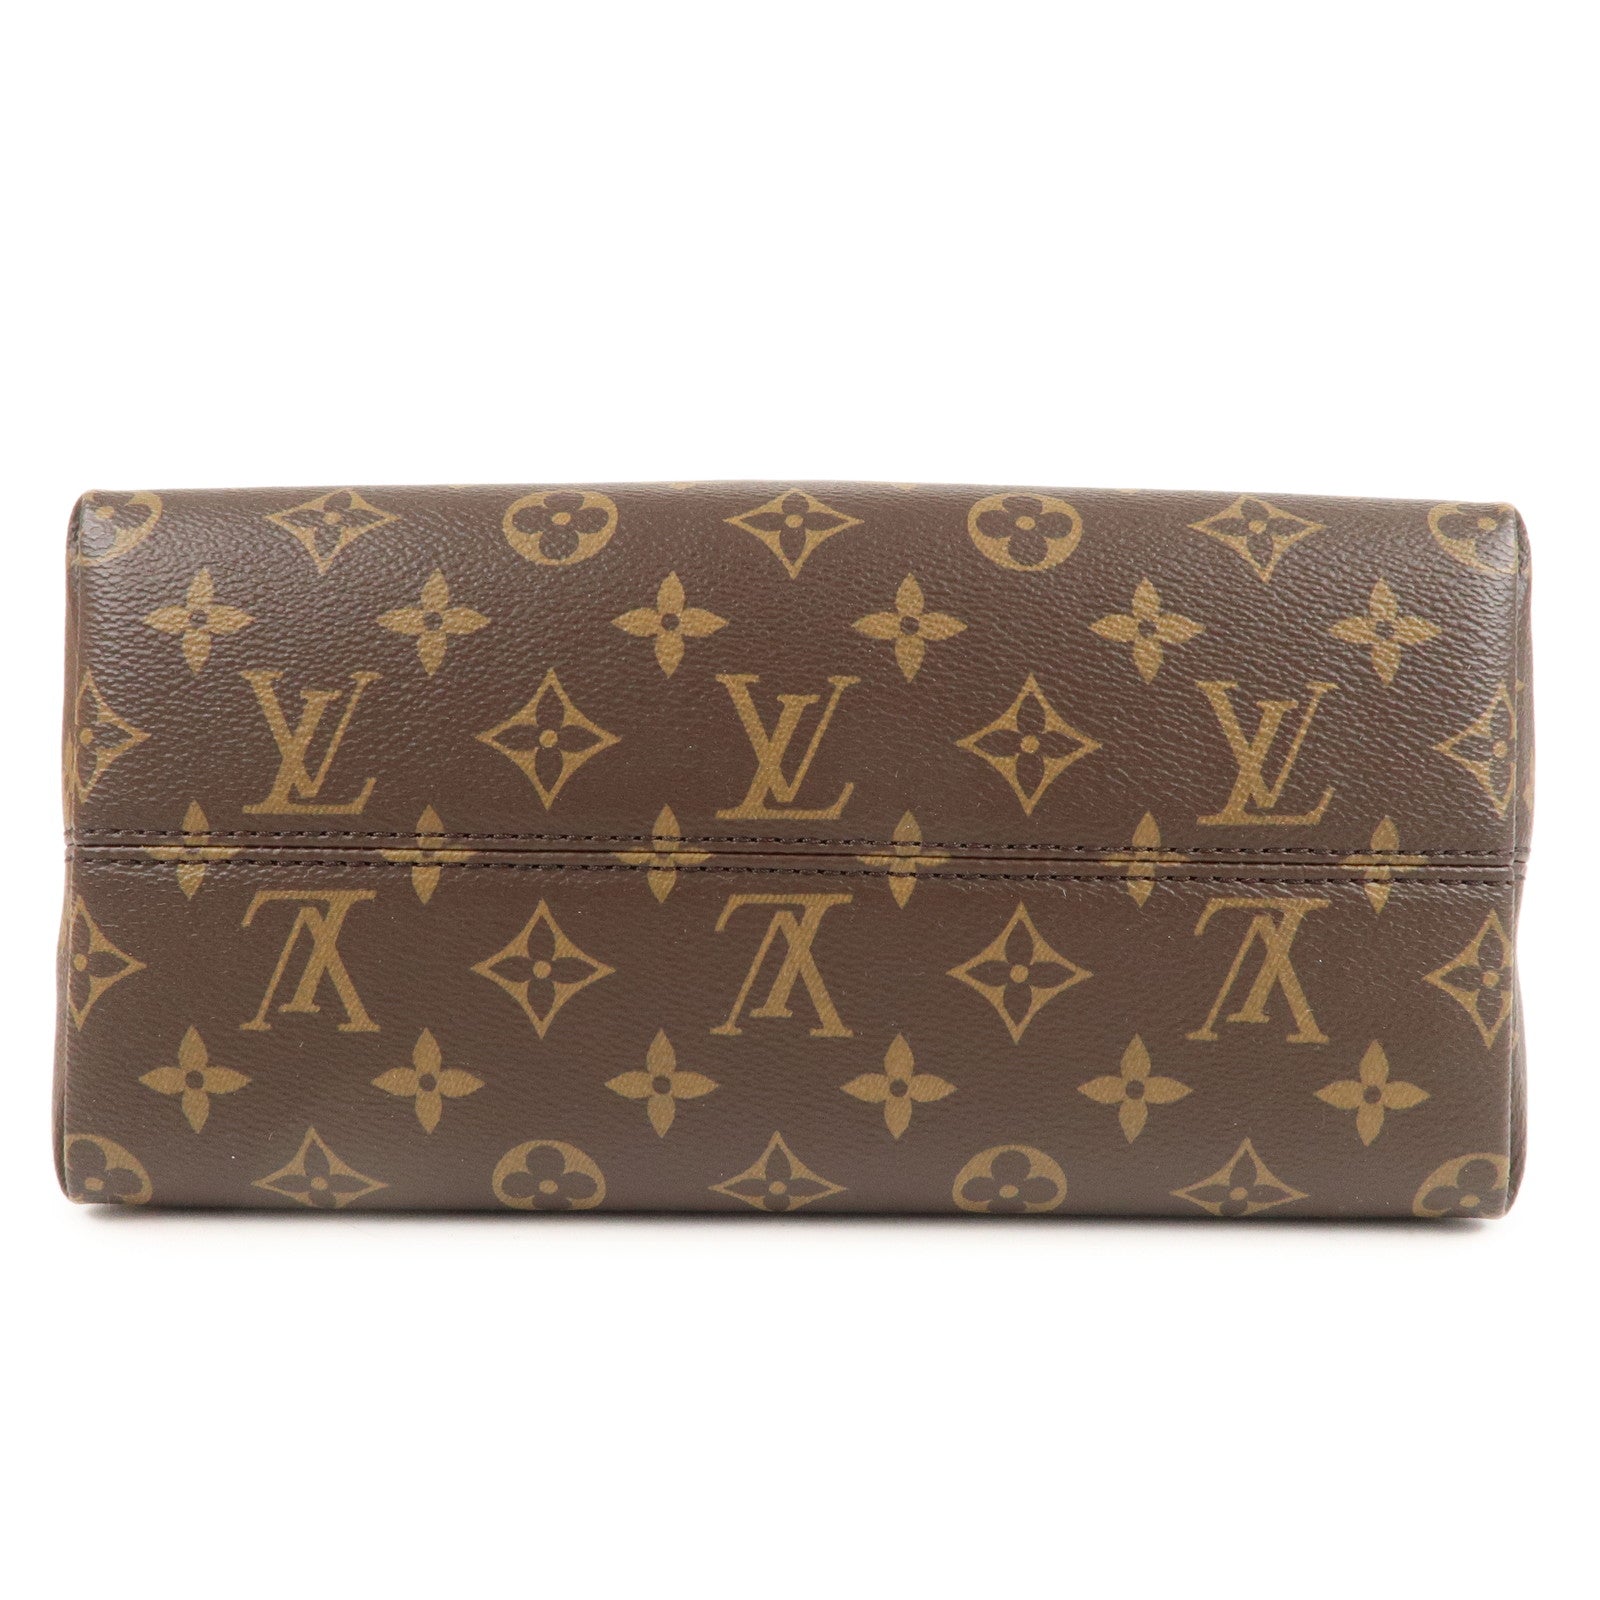 Louis Vuitton / Tote Boetie PM M45986, Brown, One Size